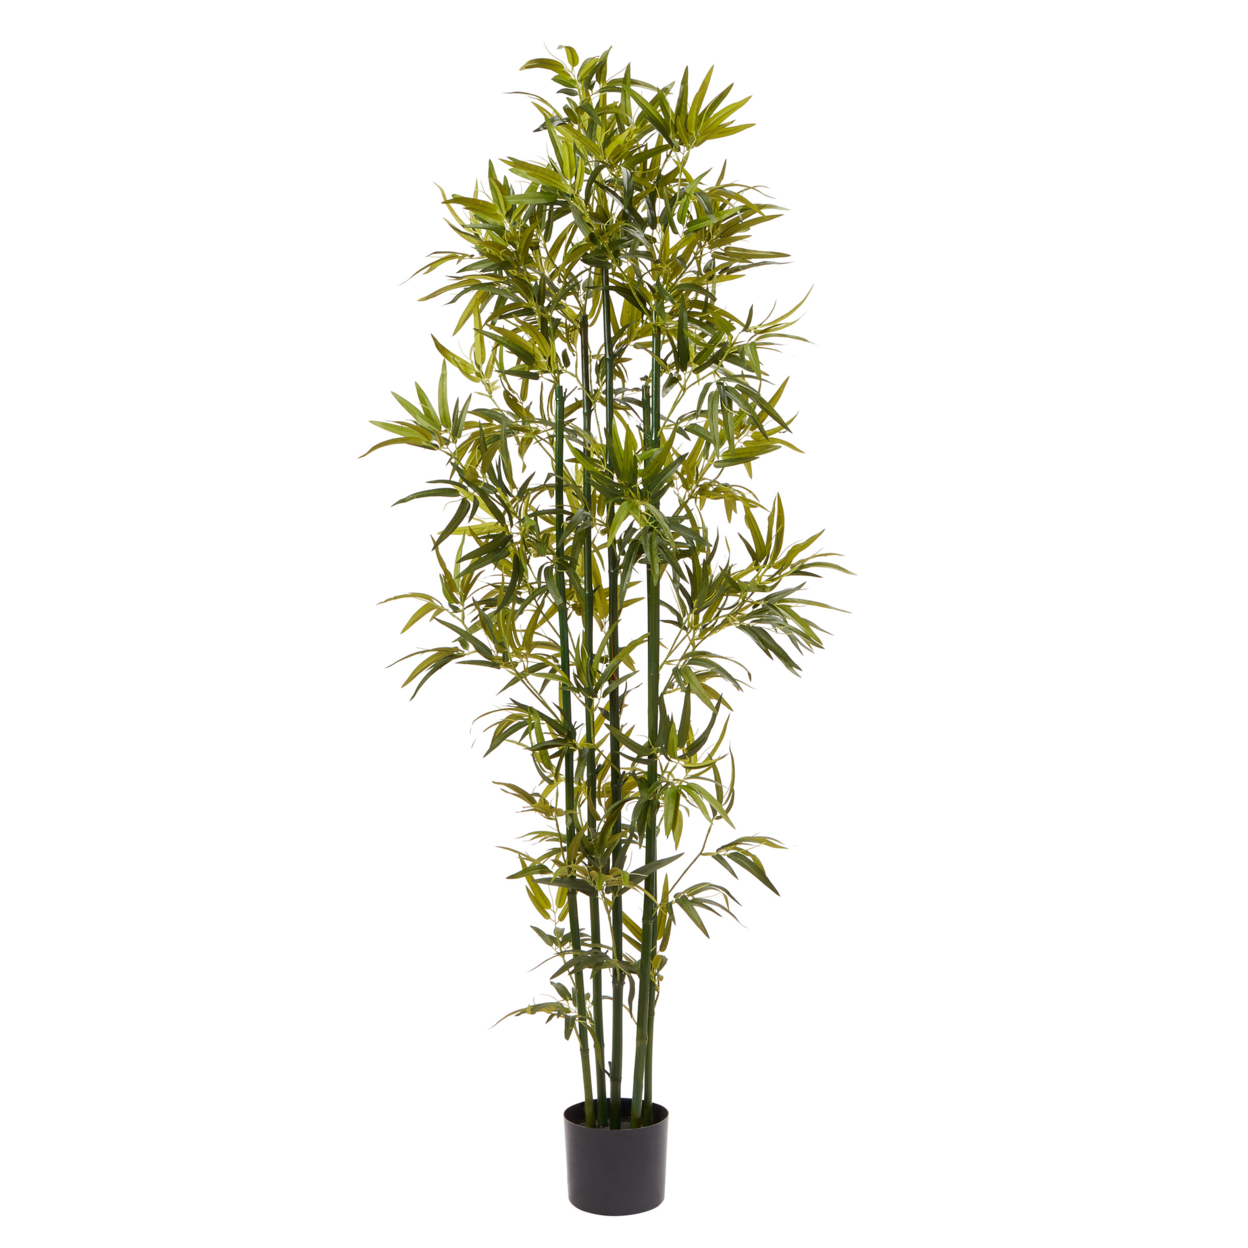 6 Ft. Artificial Bamboo Tall Faux Potted Indoor Floor Plant For Home Large And Lifelike By Pure Garden (Green Trunk)